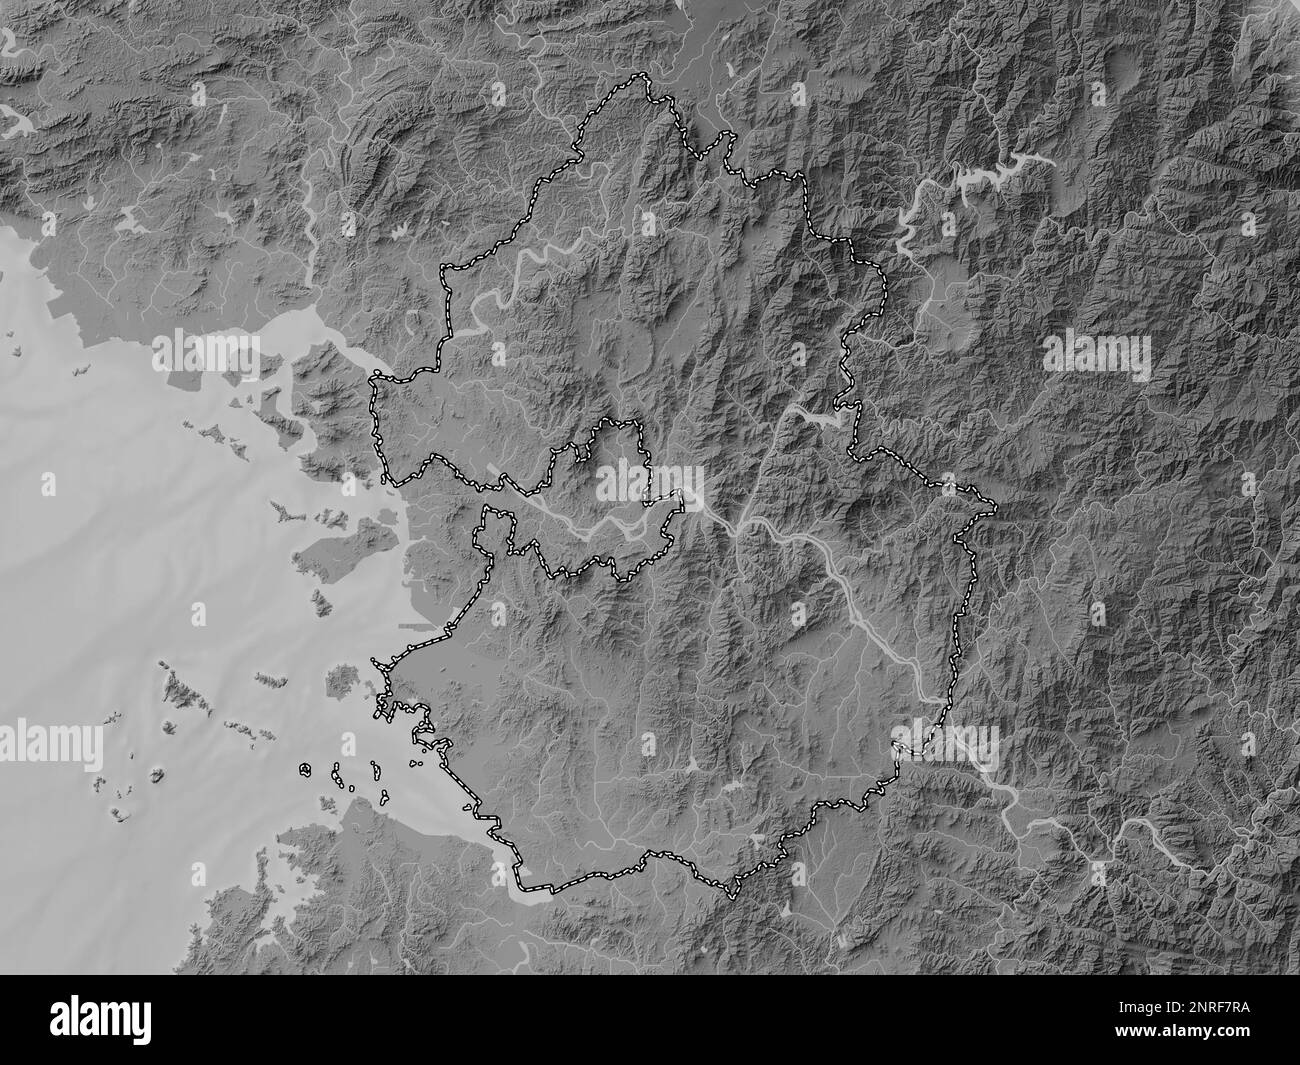 Gyeonggi-do, province of South Korea. Grayscale elevation map with lakes and rivers Stock Photo